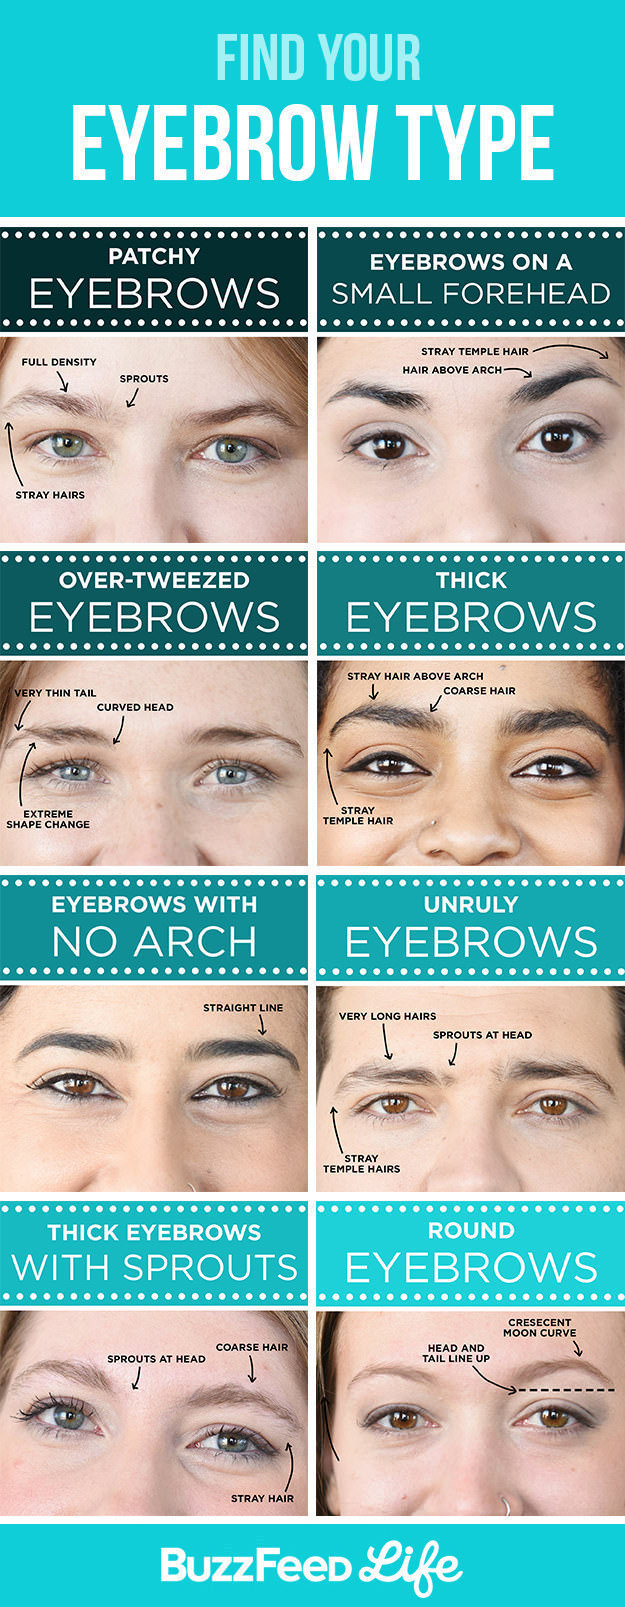 Eyebrows play an important role in beauty and makeup. Perfect eyebrows that suit you are must if you want to look beautiful and here are 17 brilliant EYEBROW hacks to learn!